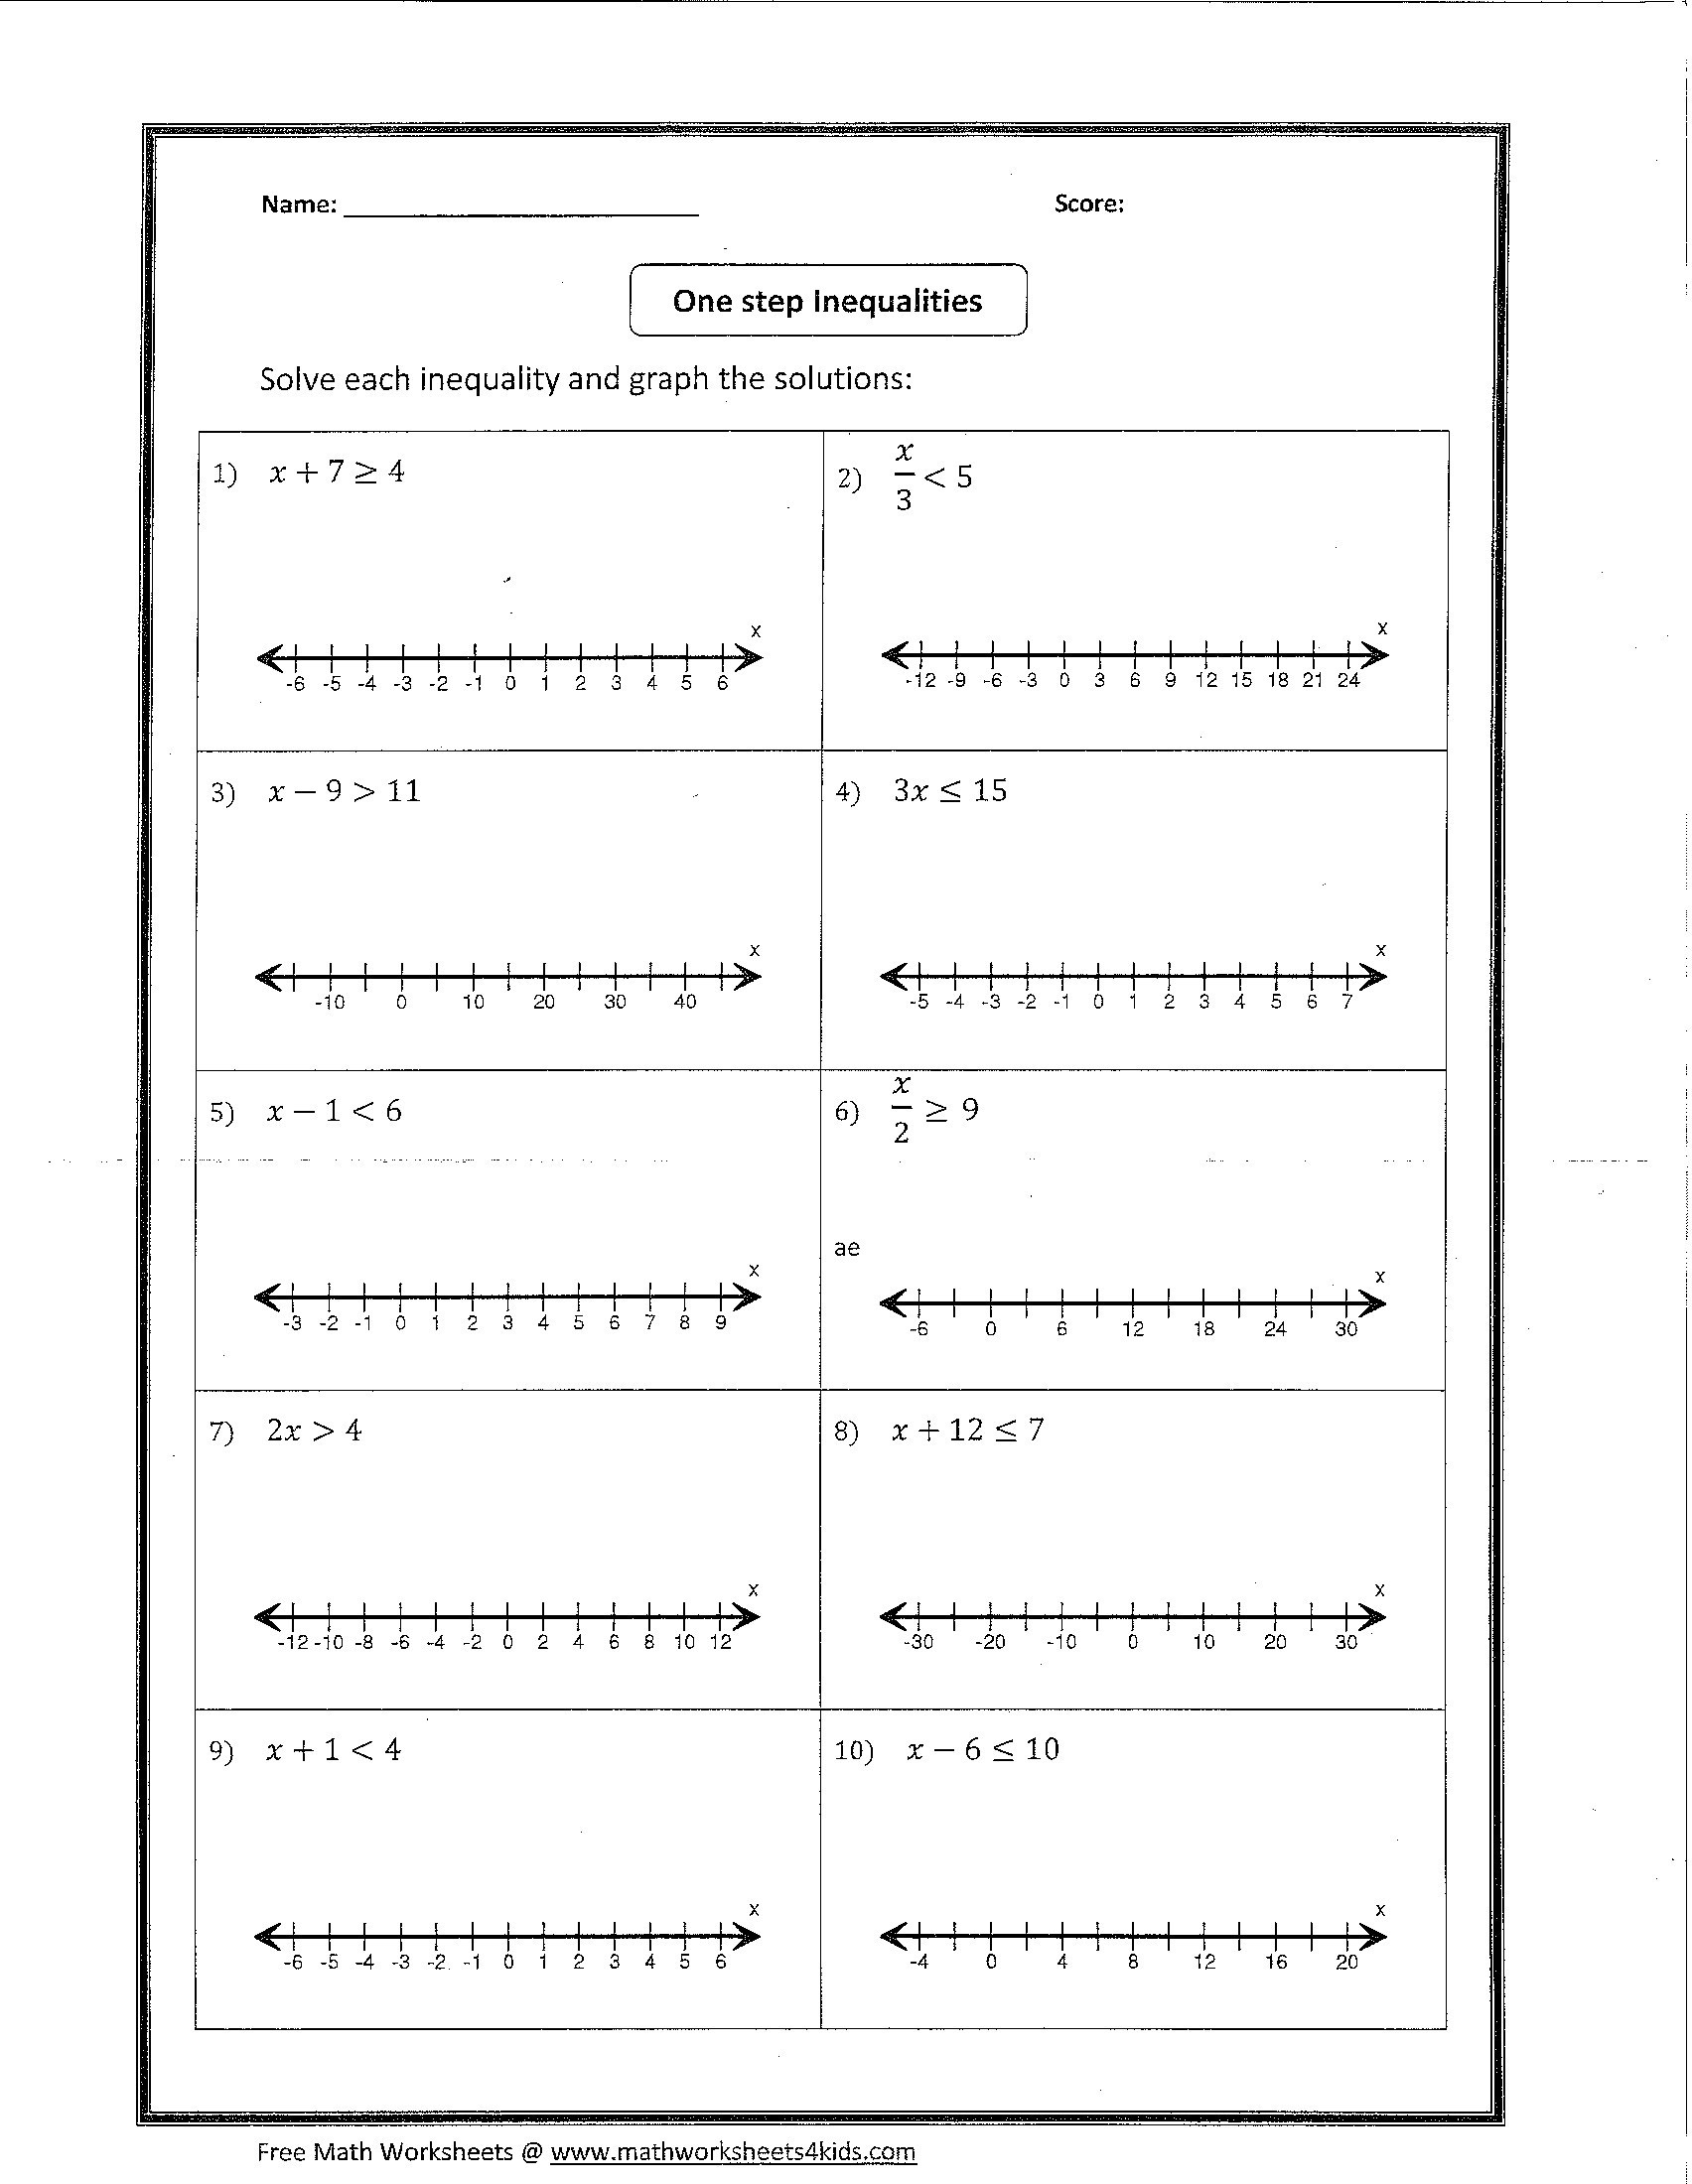 Algebra 1 Inequalities Worksheet Lovely Linear Equations Worksheet with Answers